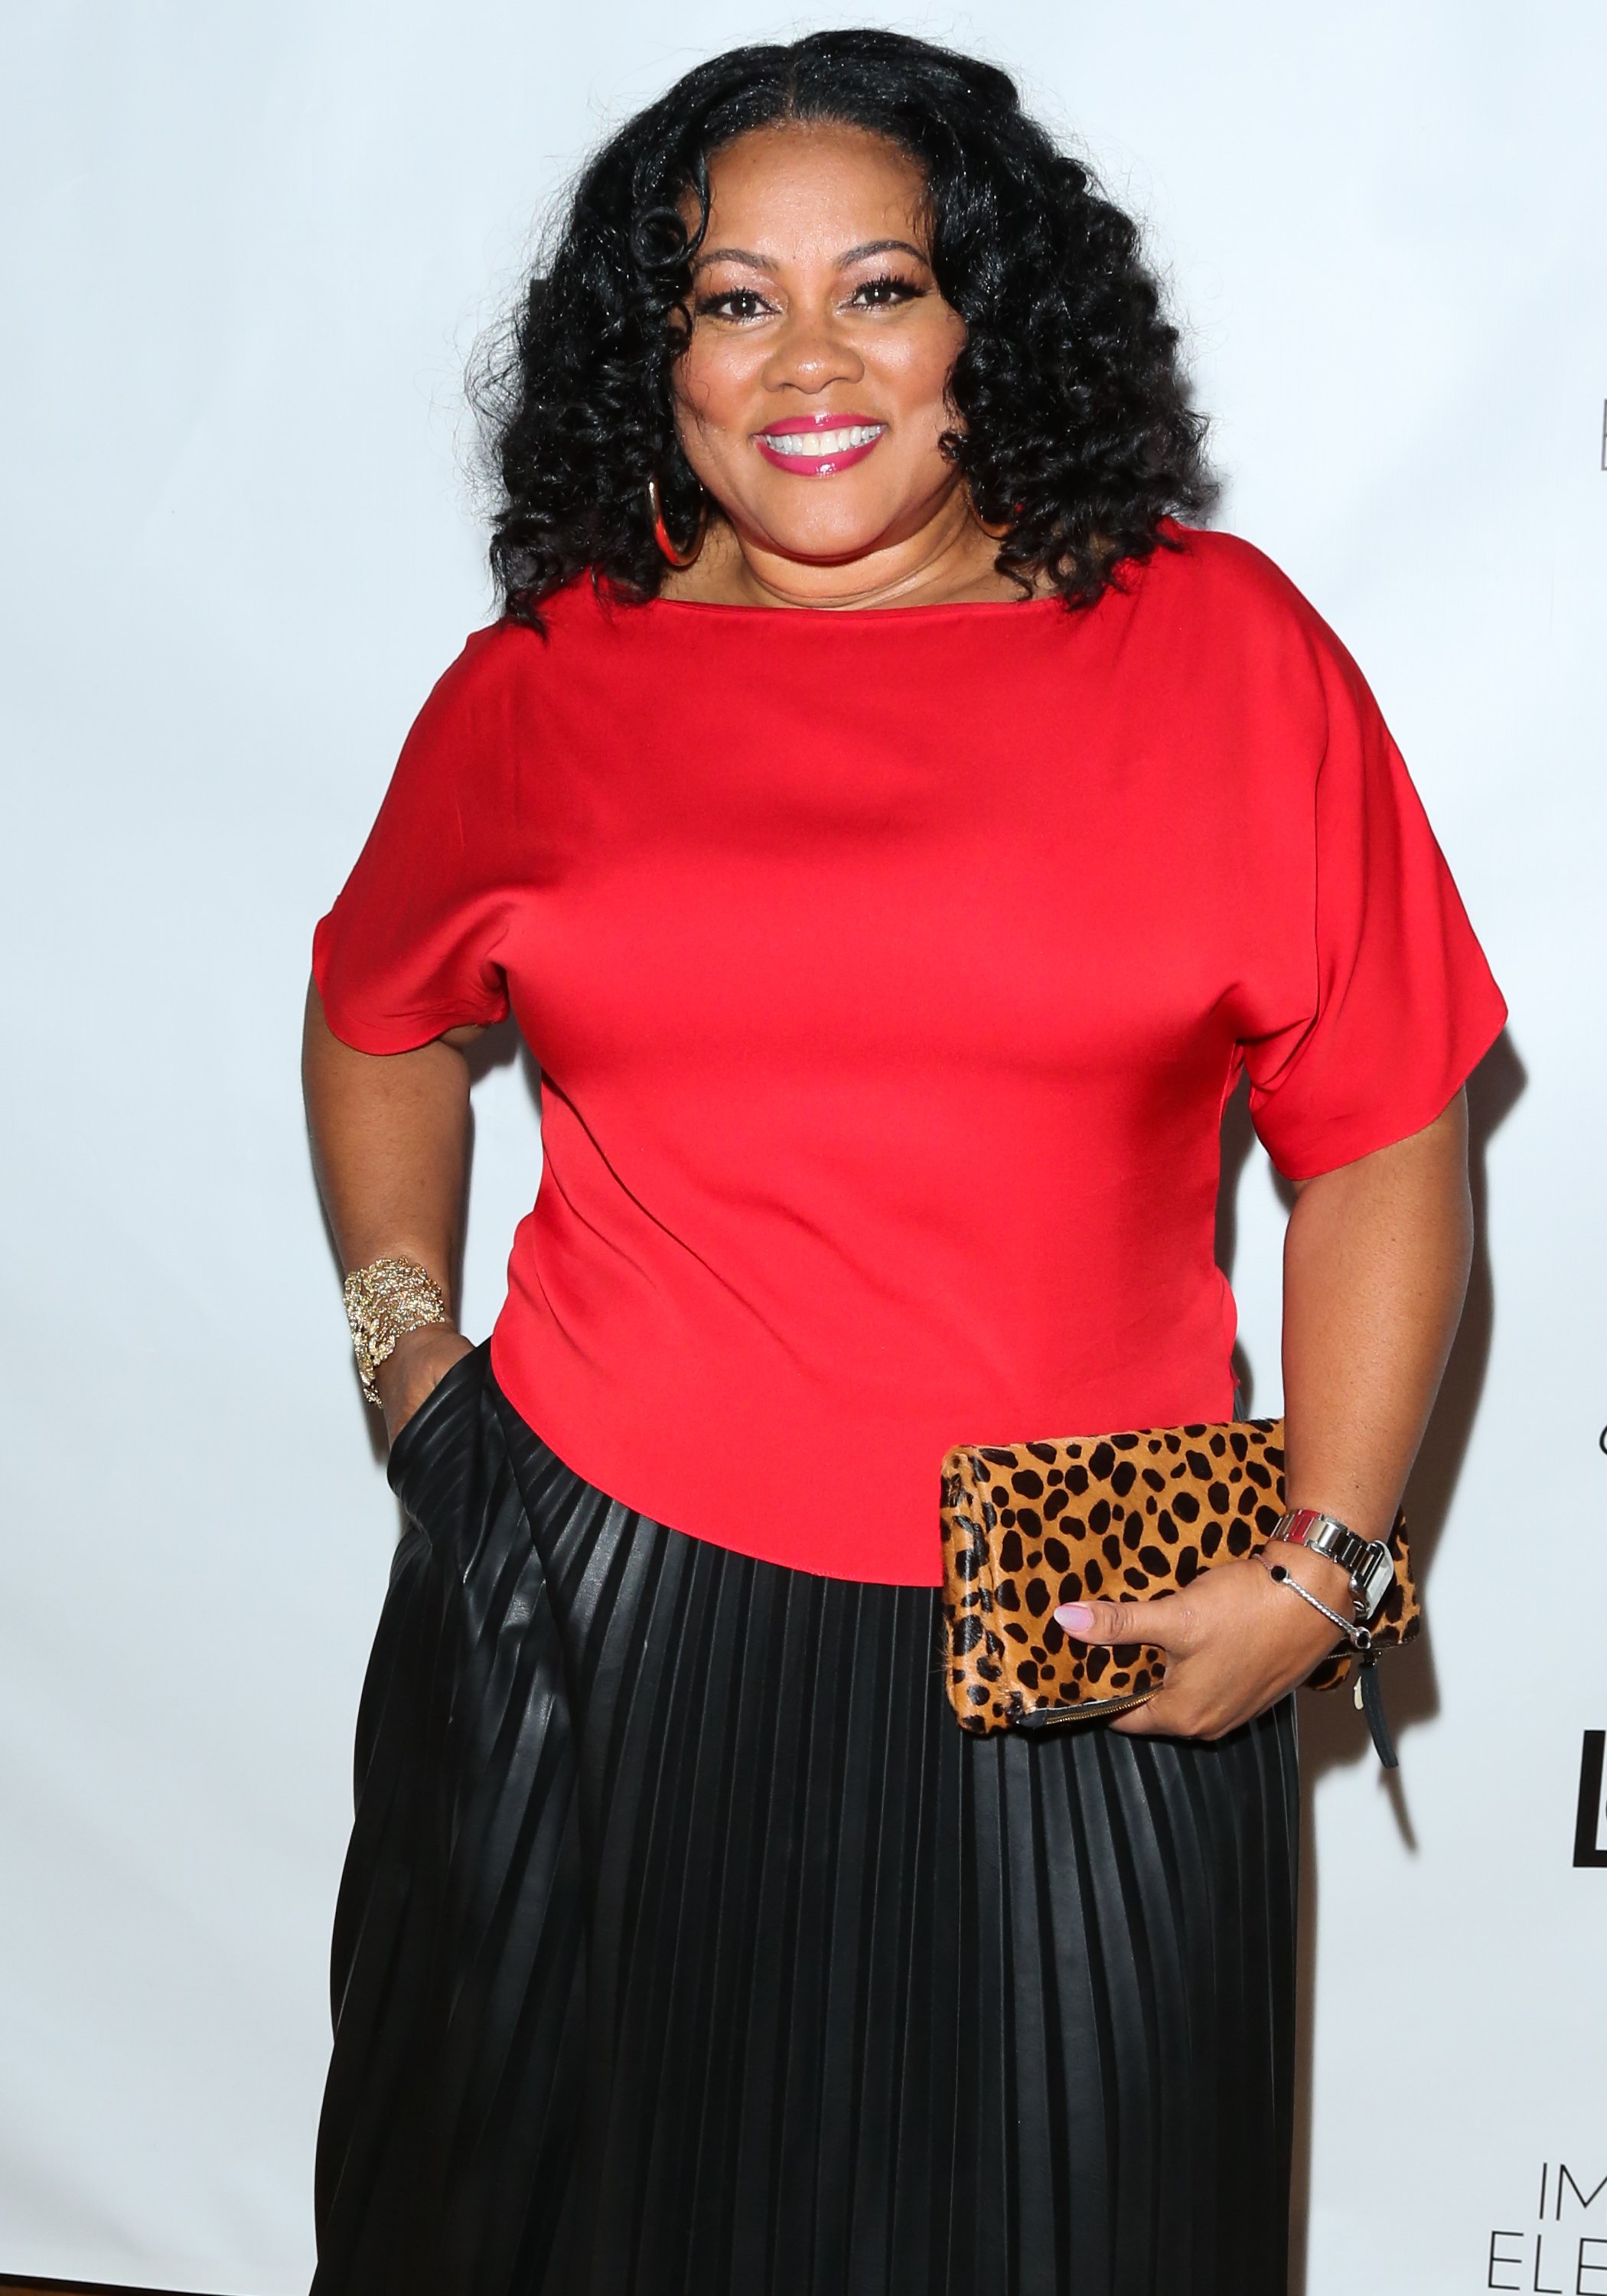  Lela Rochon at the release party for the book "Every Day I'm Hustling" at Rain Bar and Lounge on April 8, 2018 in Studio City, California.|Source: Getty Images